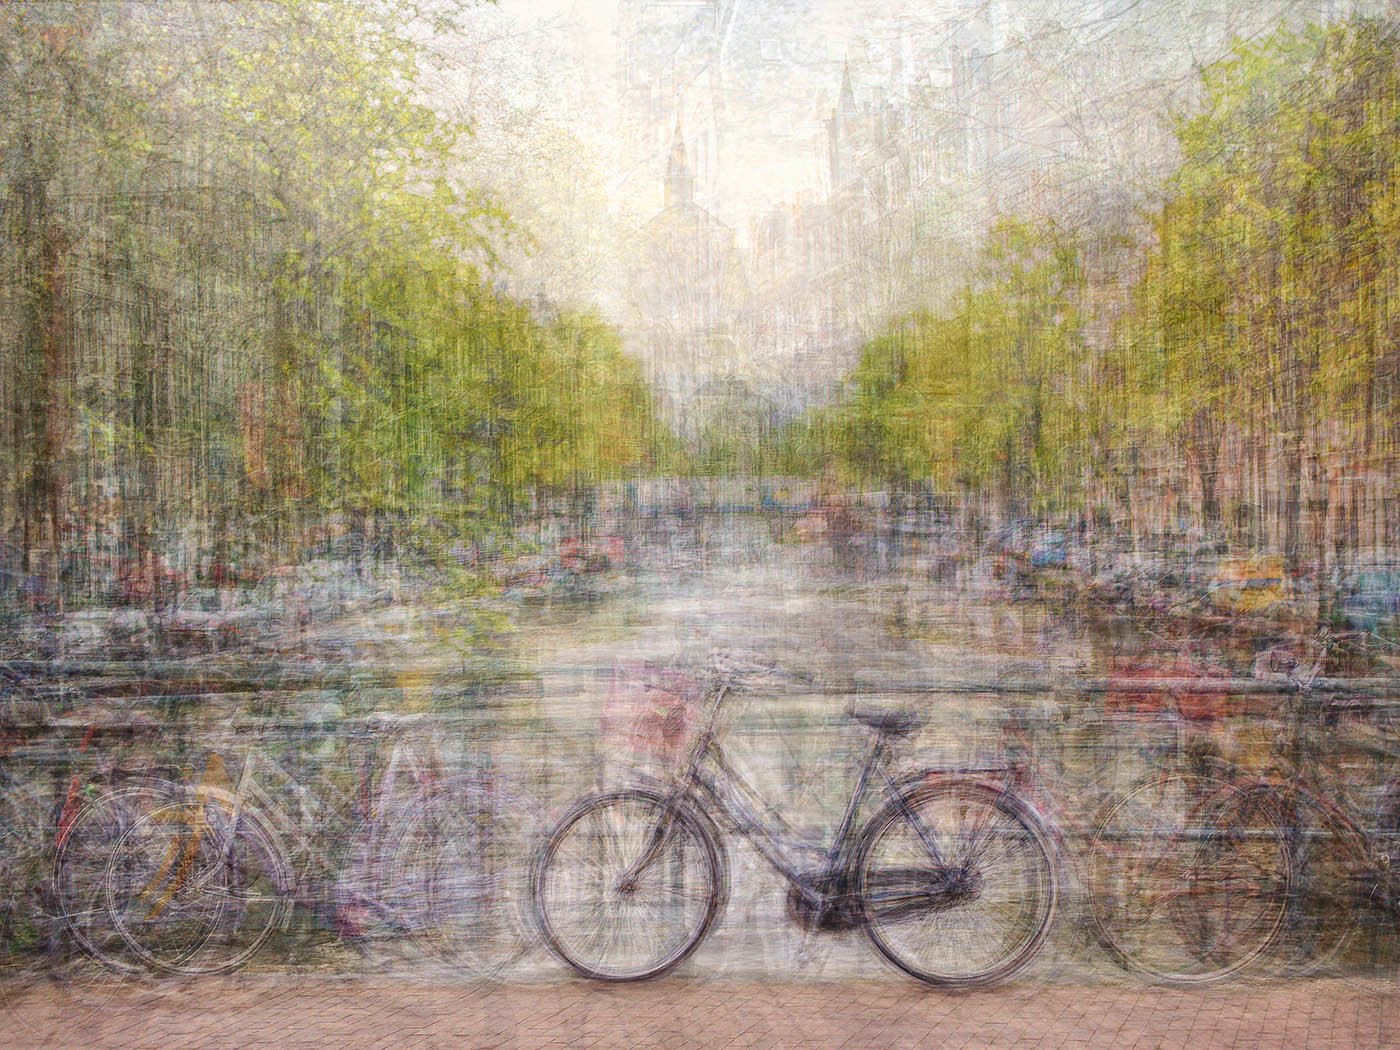 Bicycles, Amsterdam Canal by Pep Ventosa